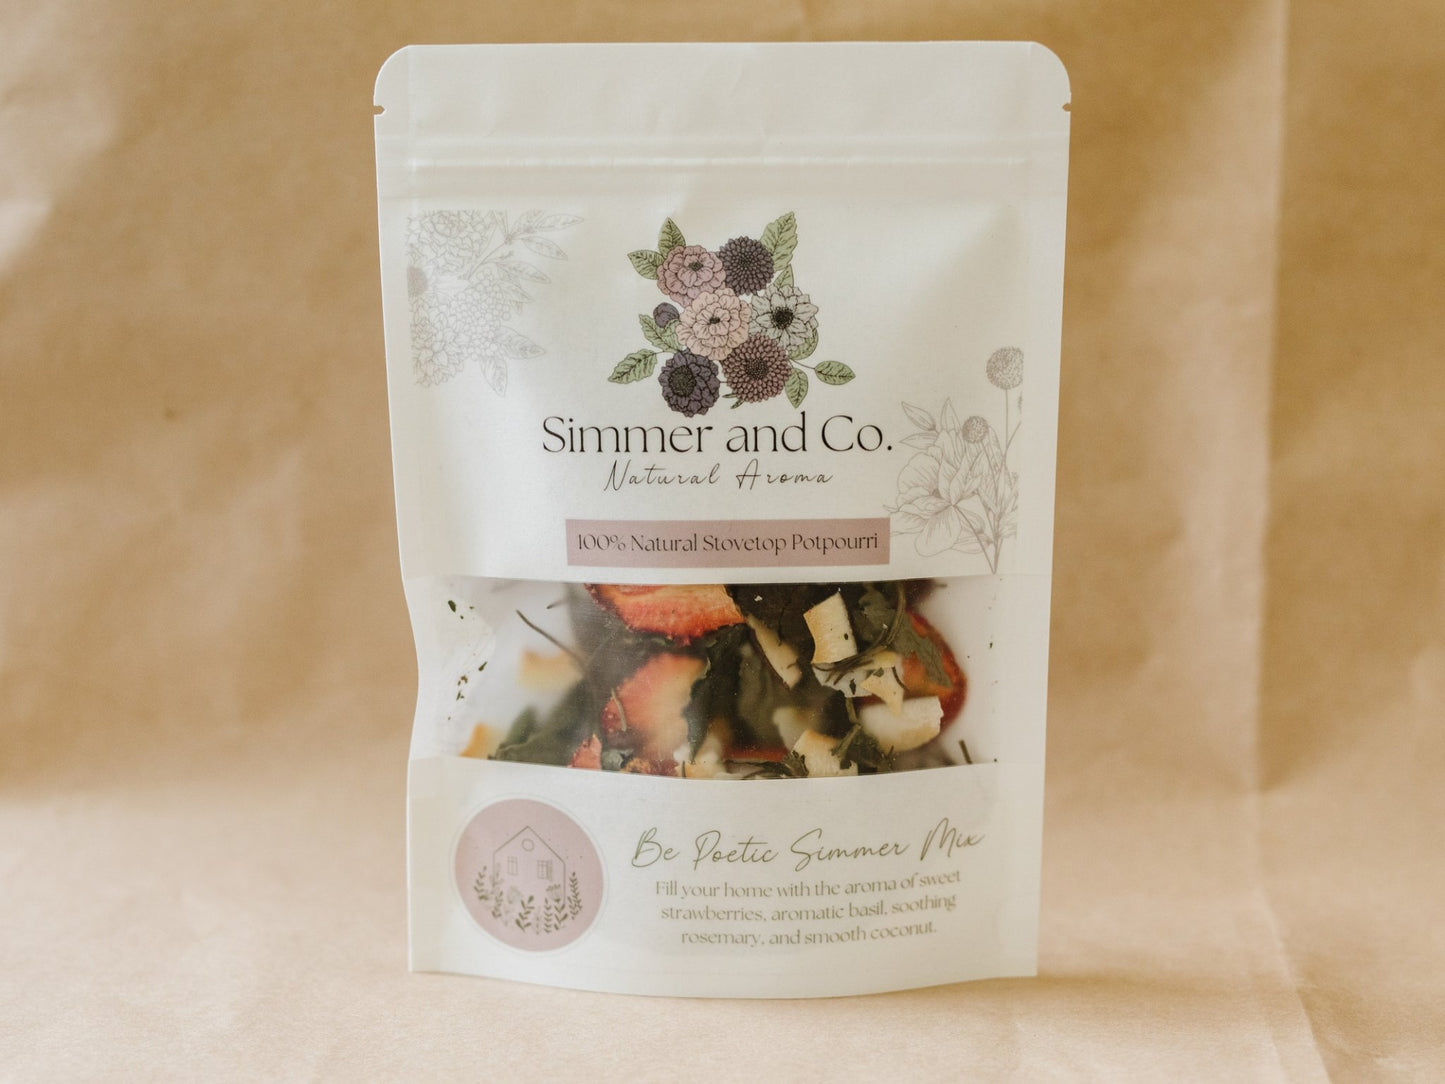 Be Poetic Simmer Mix, Stovetop Potpourri - Simmer and Co Natural Aroma Inc - Stovetop Potpourri Simmer Mix